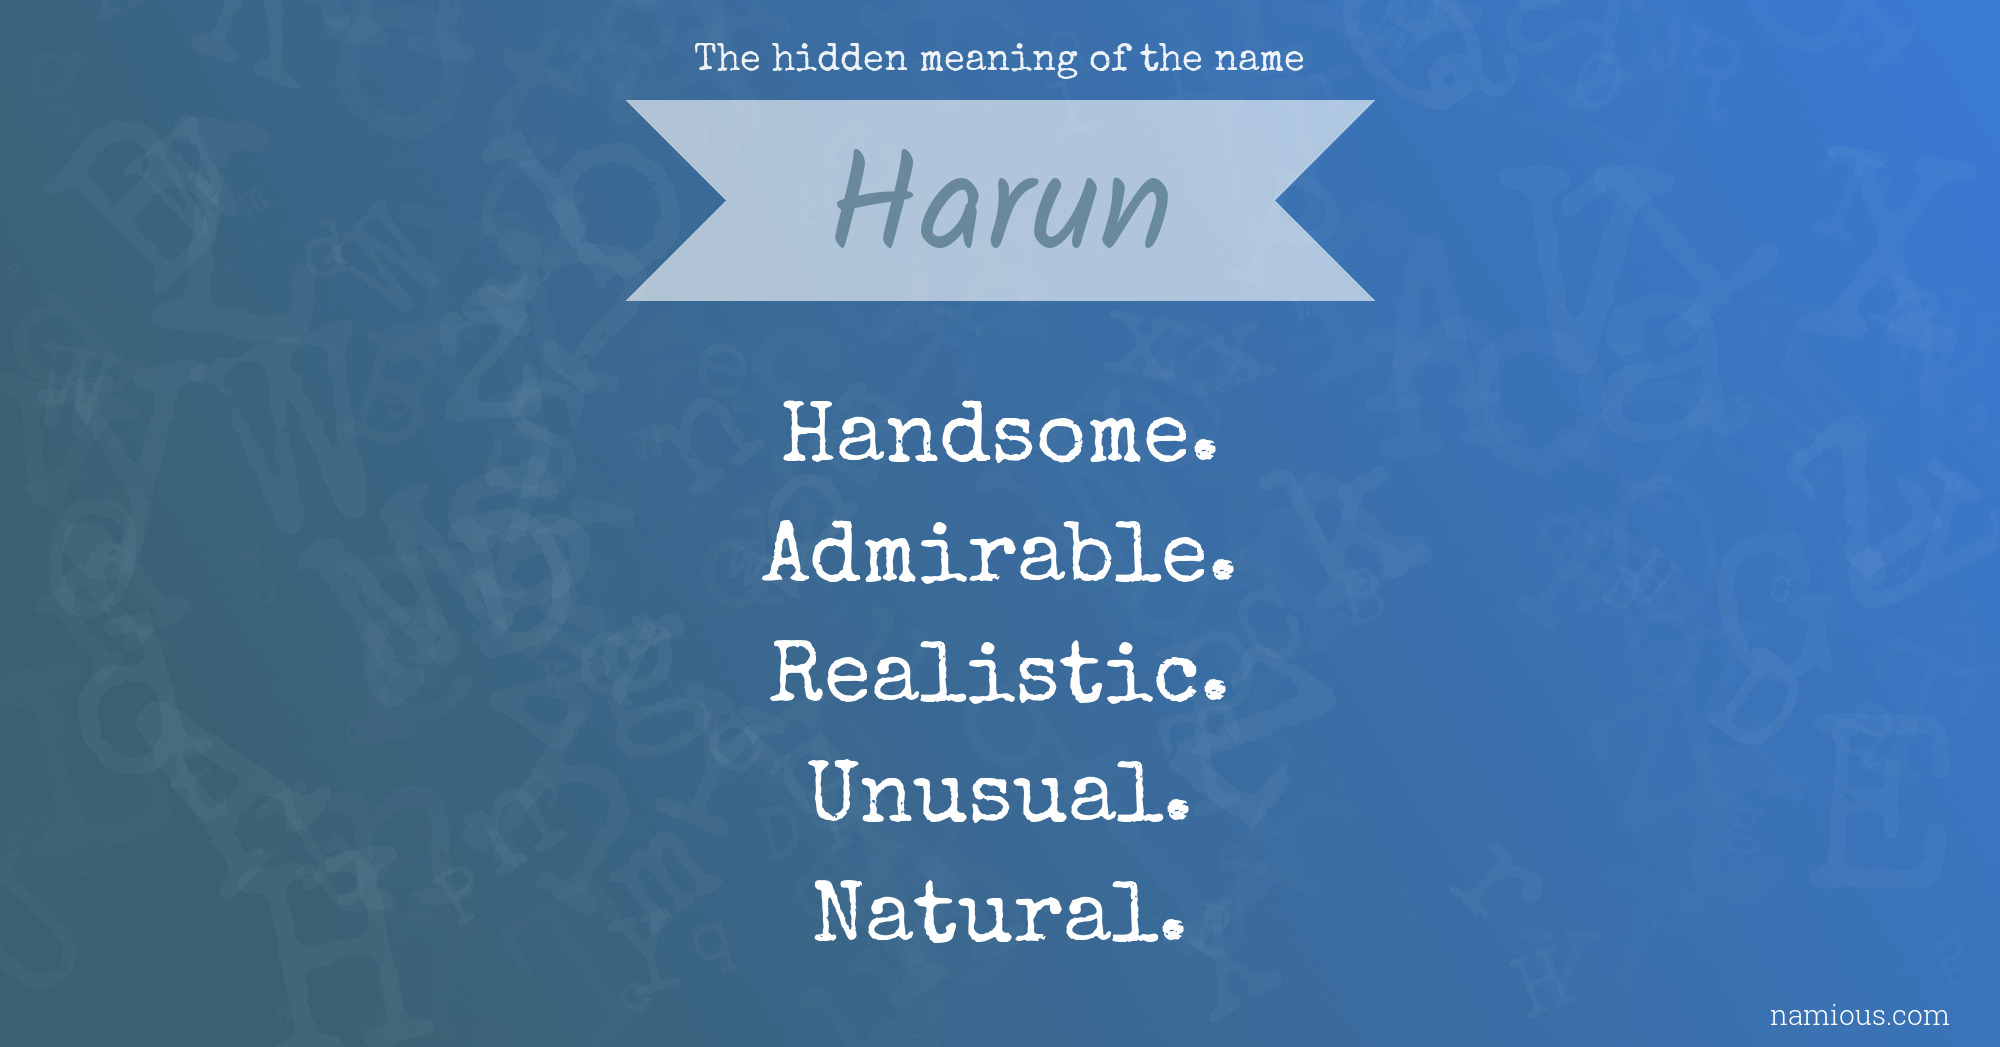 The hidden meaning of the name Harun